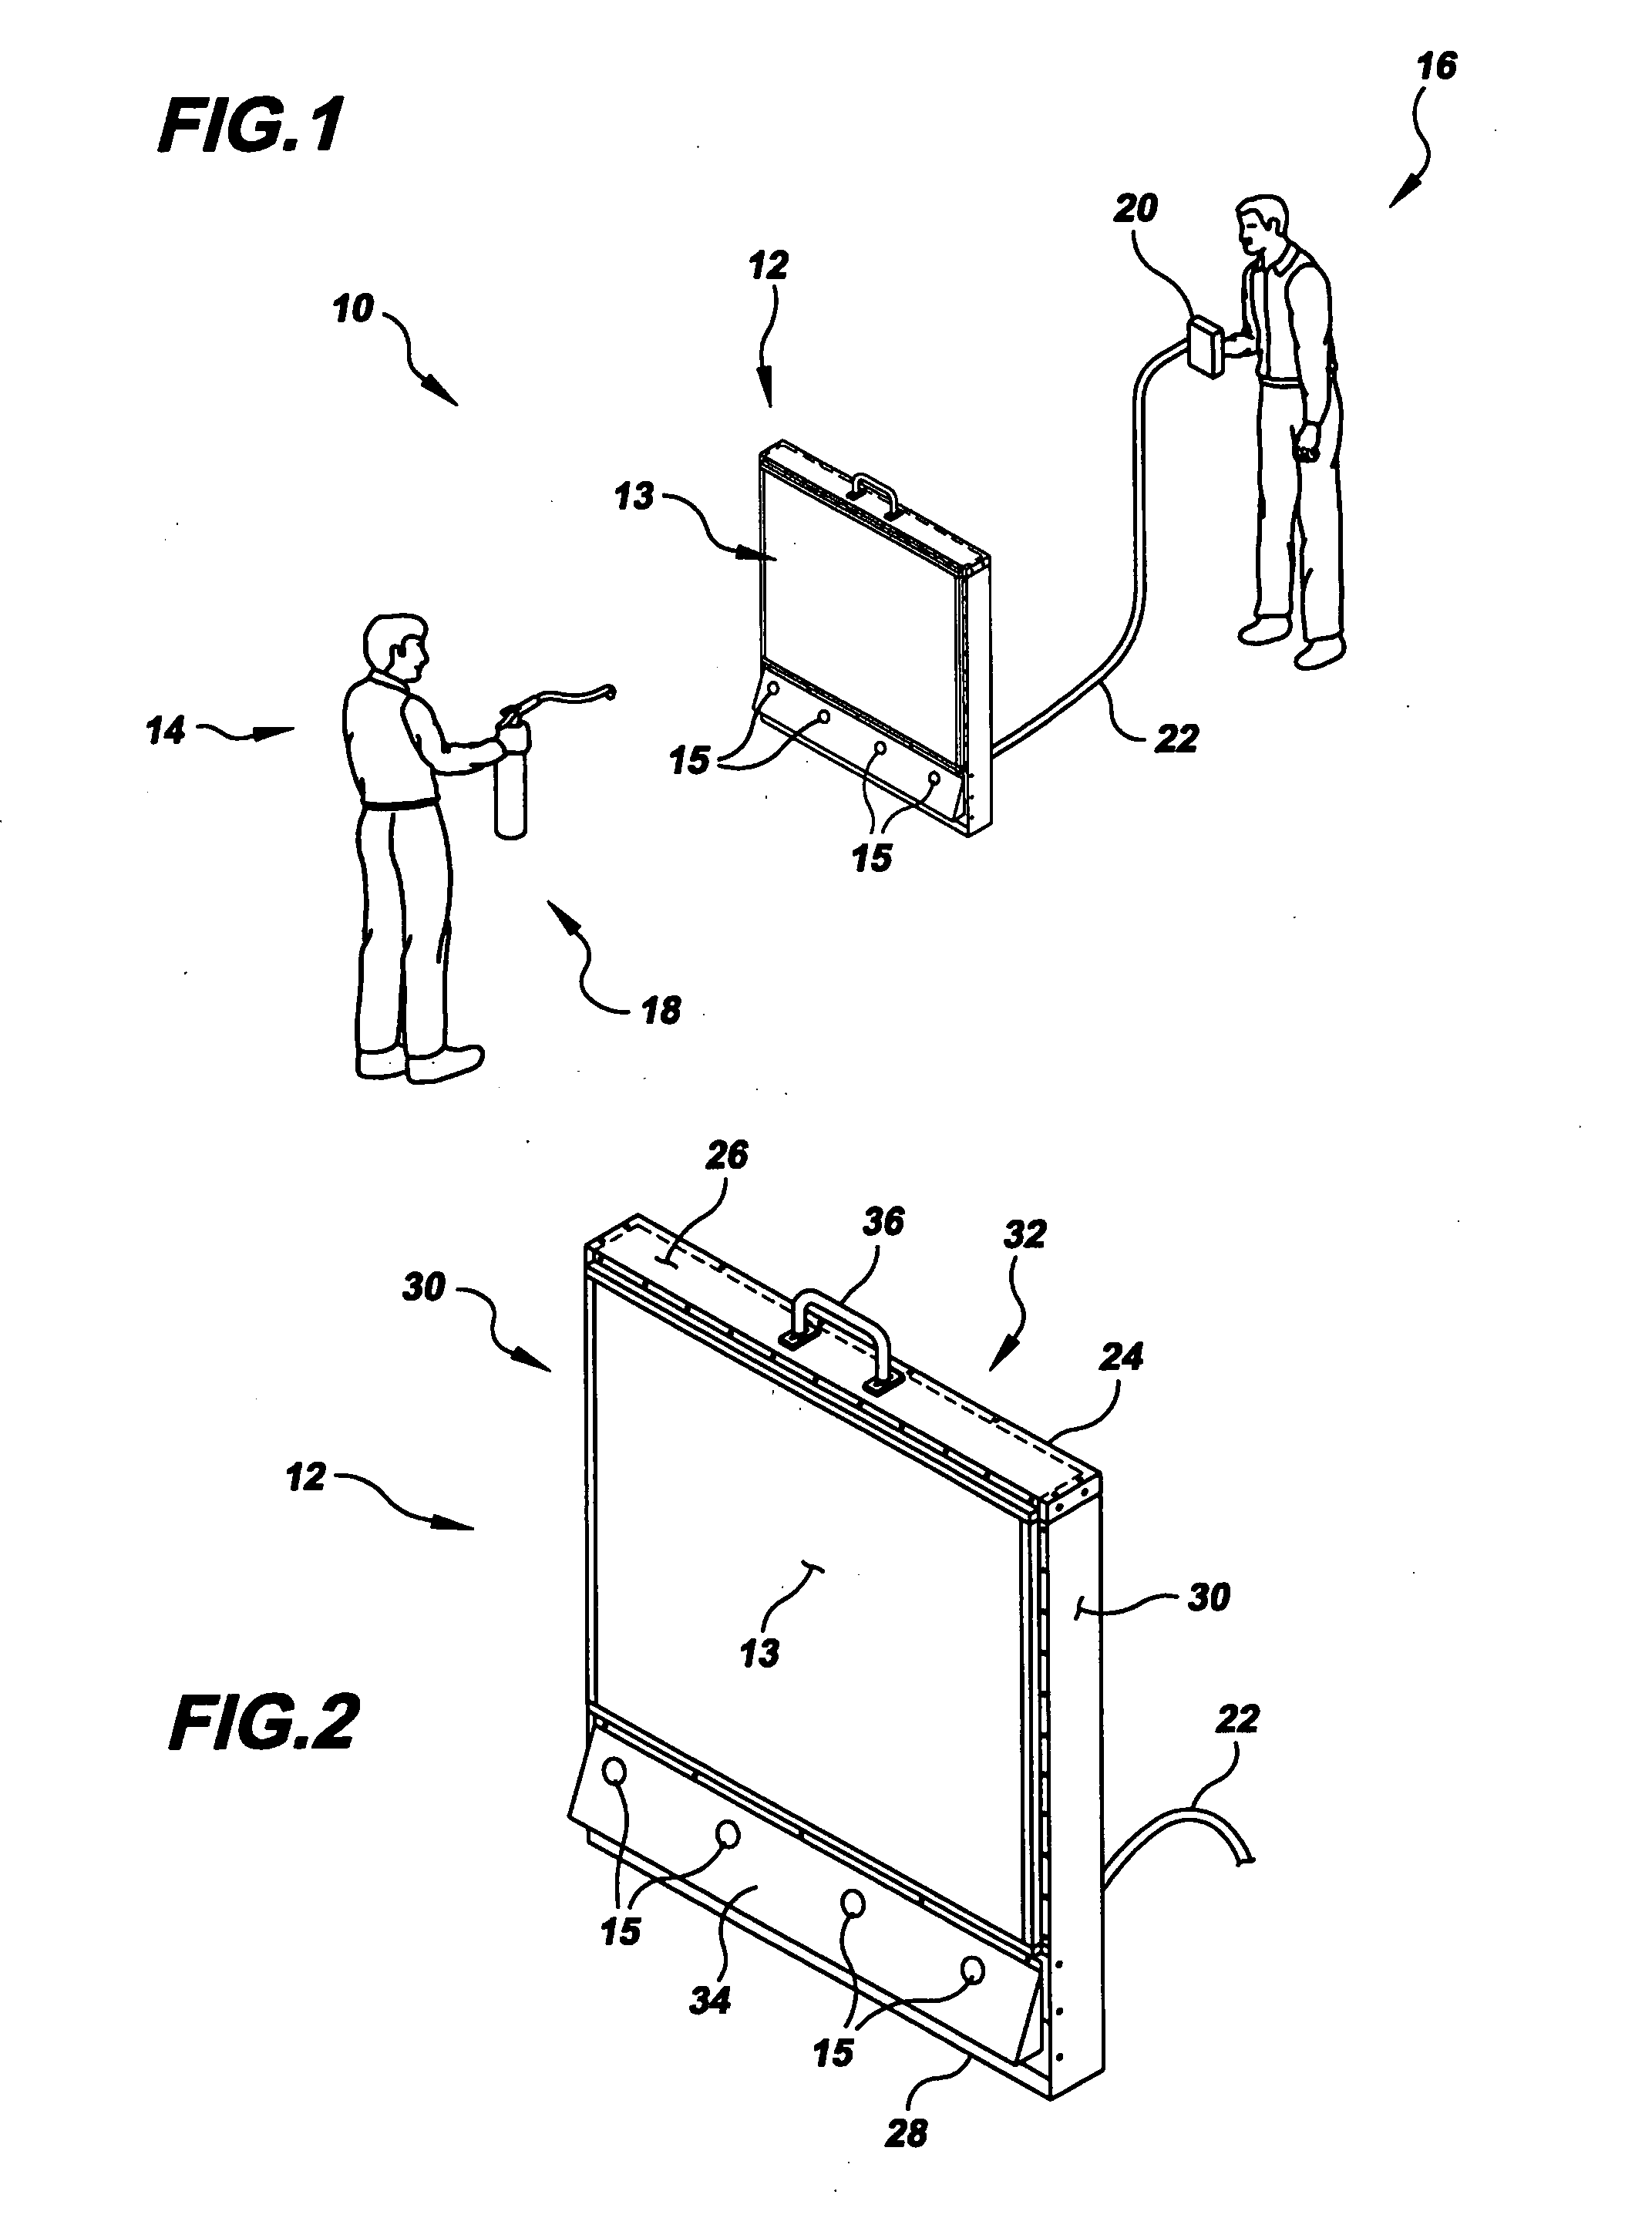 Flameless fire extinguisher training methods and apparatus